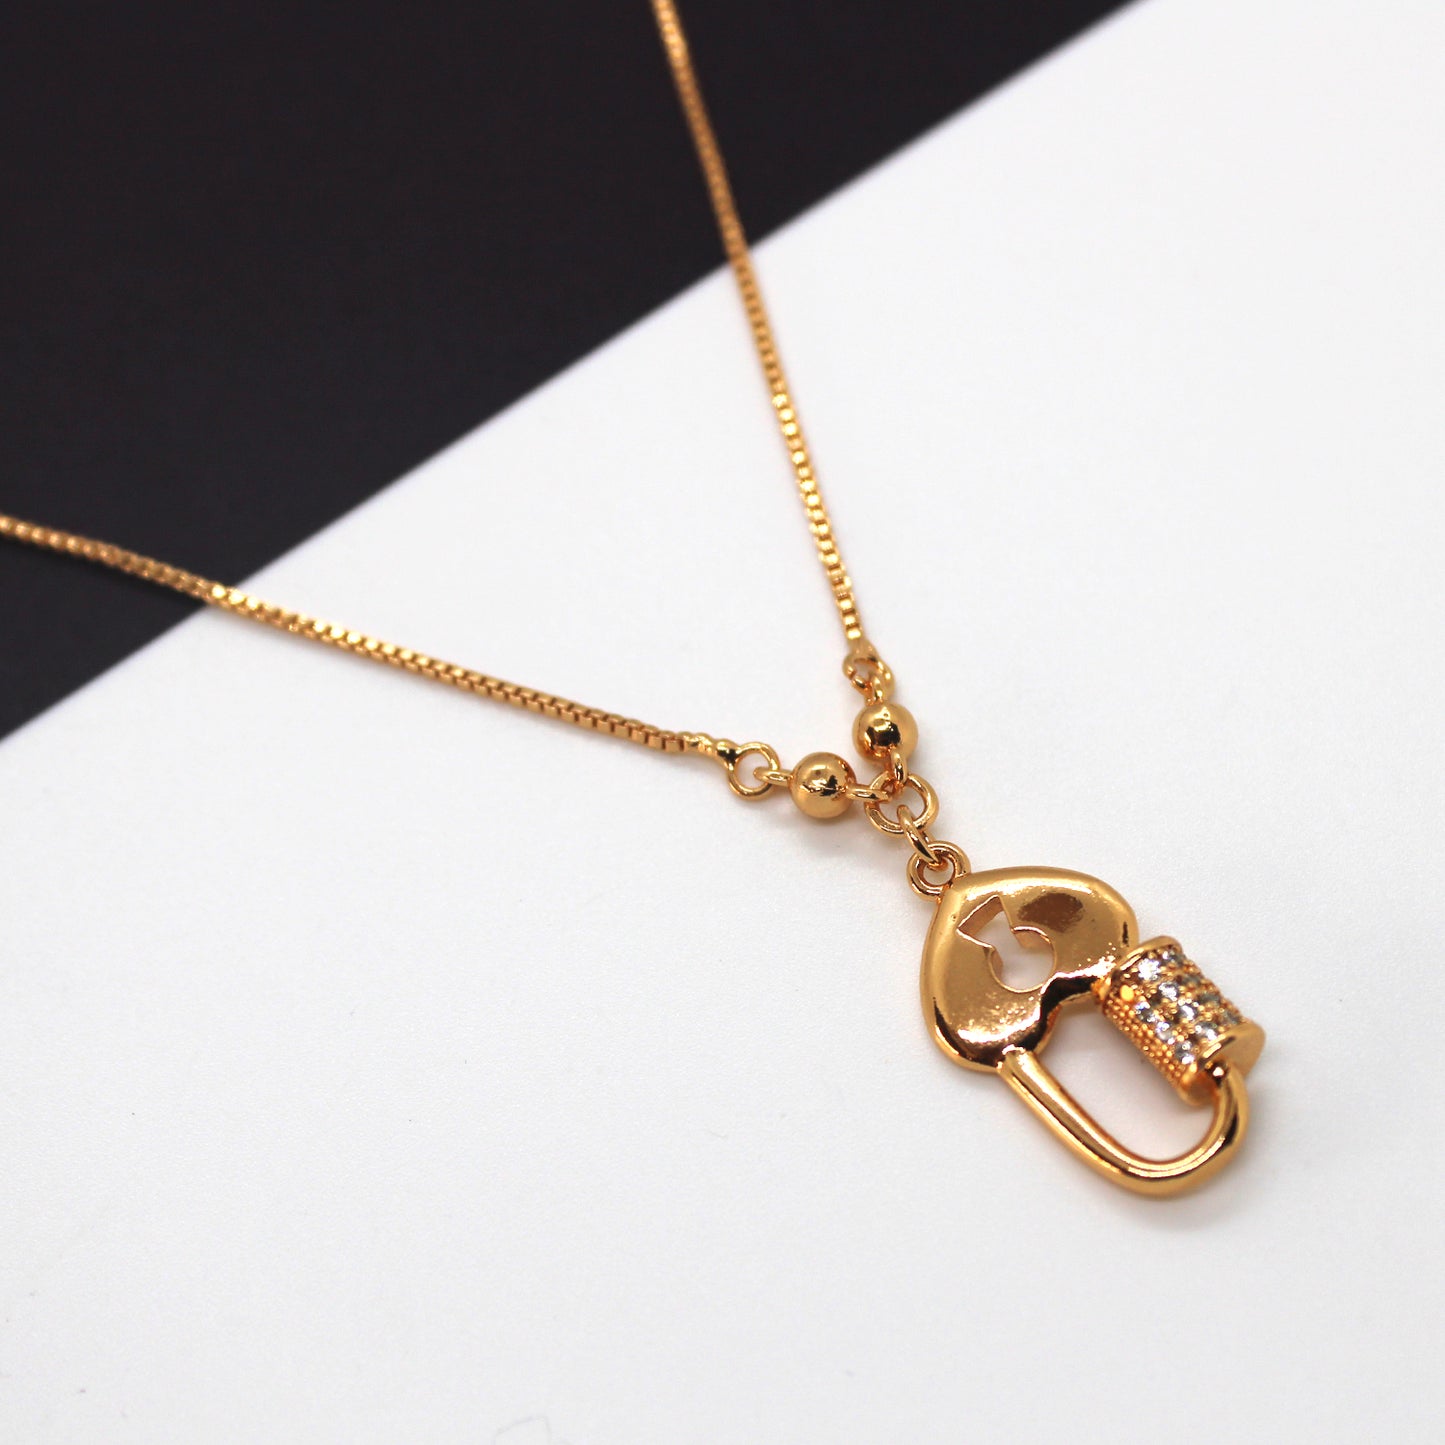 Heart Lock Pendant with Box Chain For Women